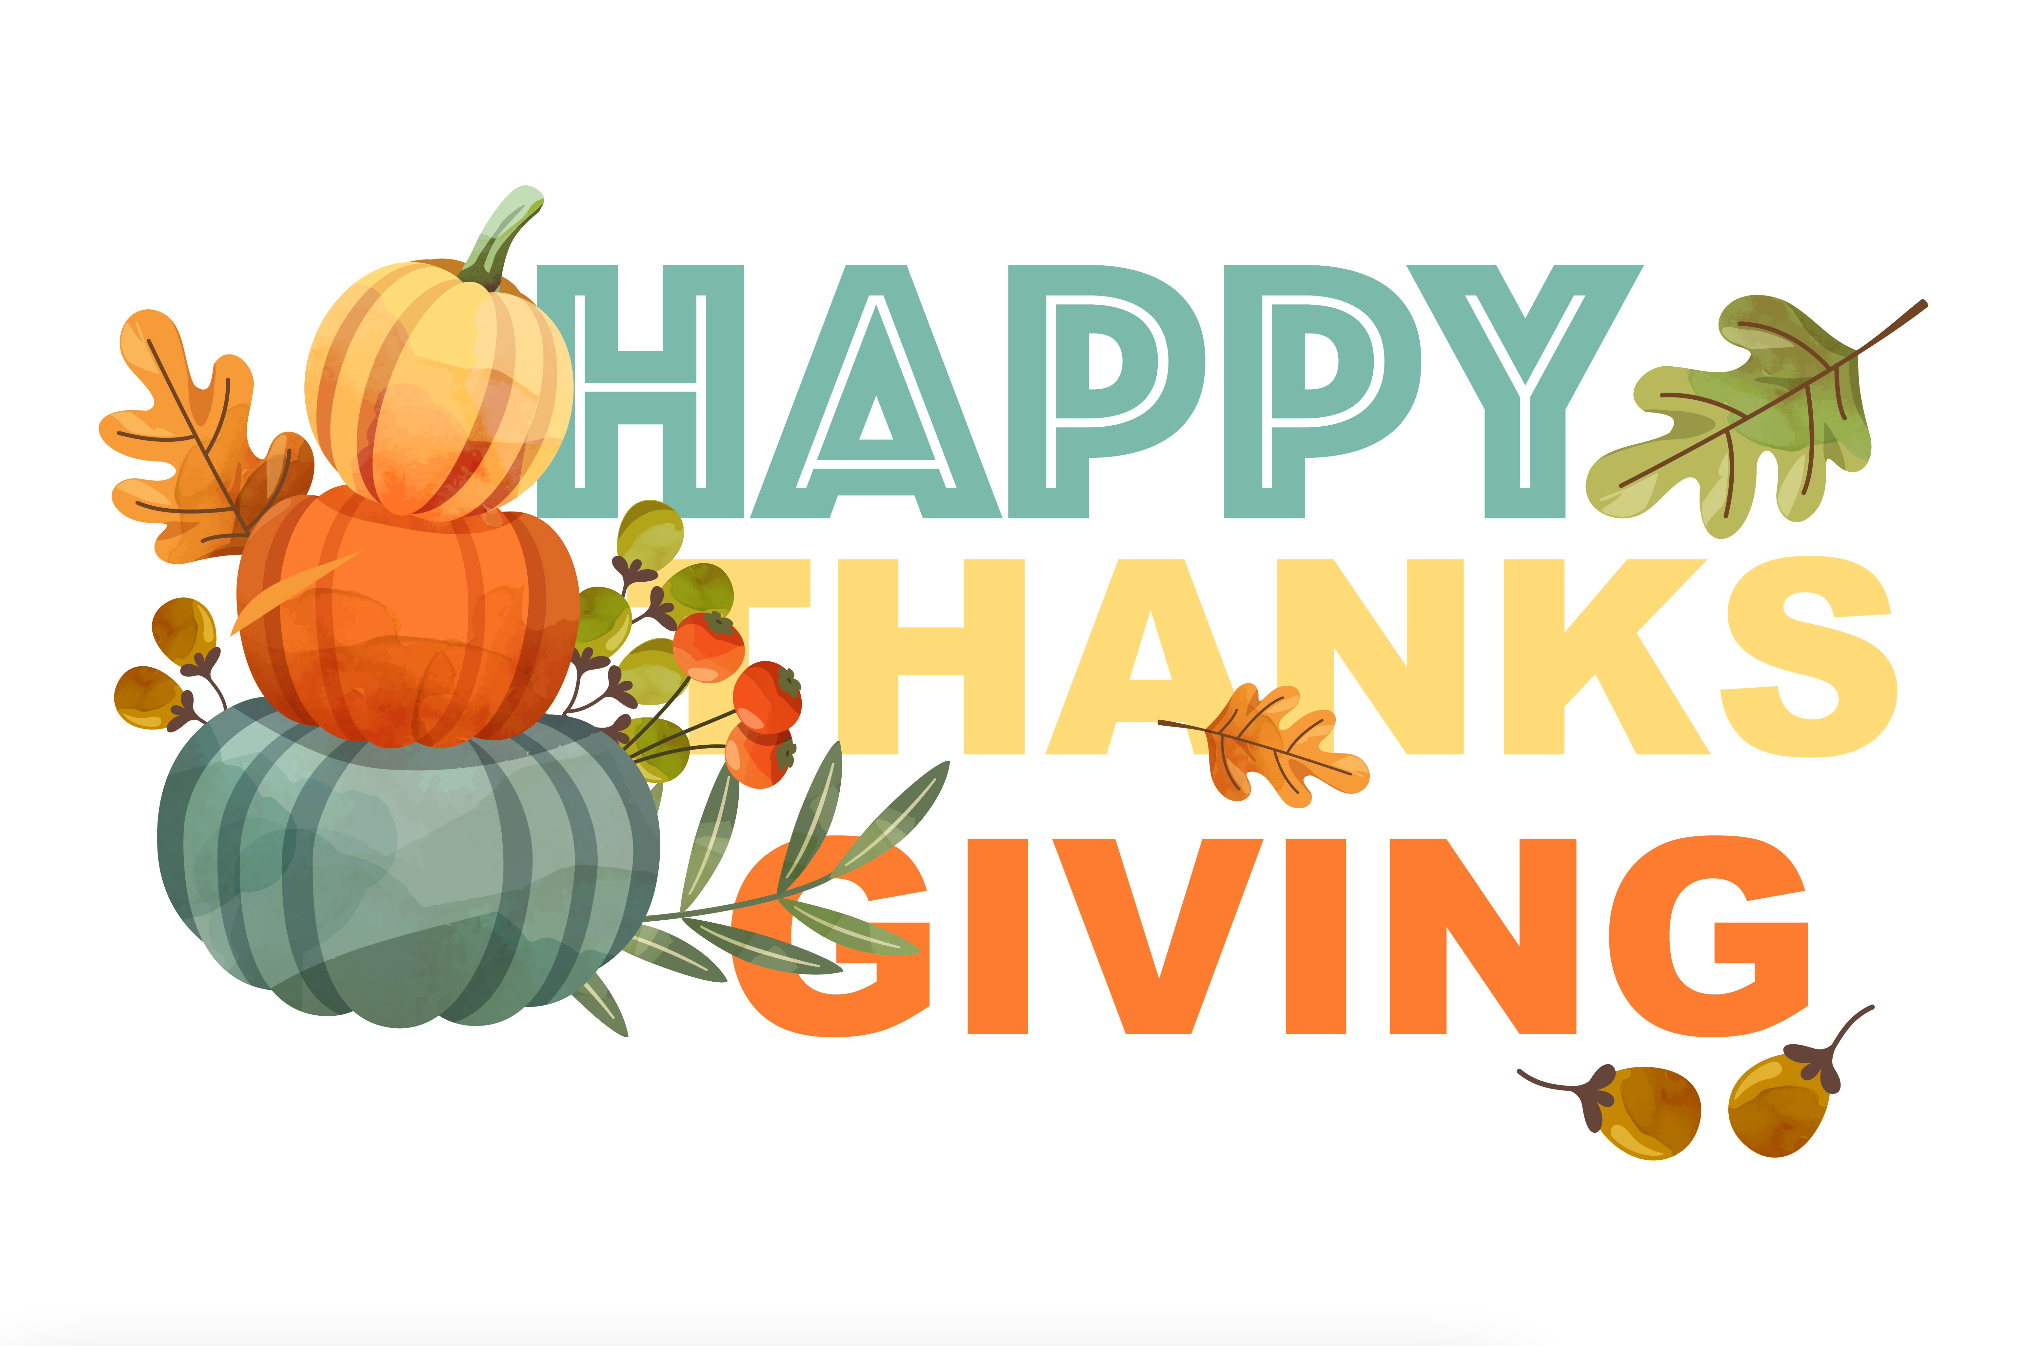 https://www.creativefabrica.com/wp-content/uploads/2021/10/27/Happy-Thanksgiving-Graphics-19308281-1.png